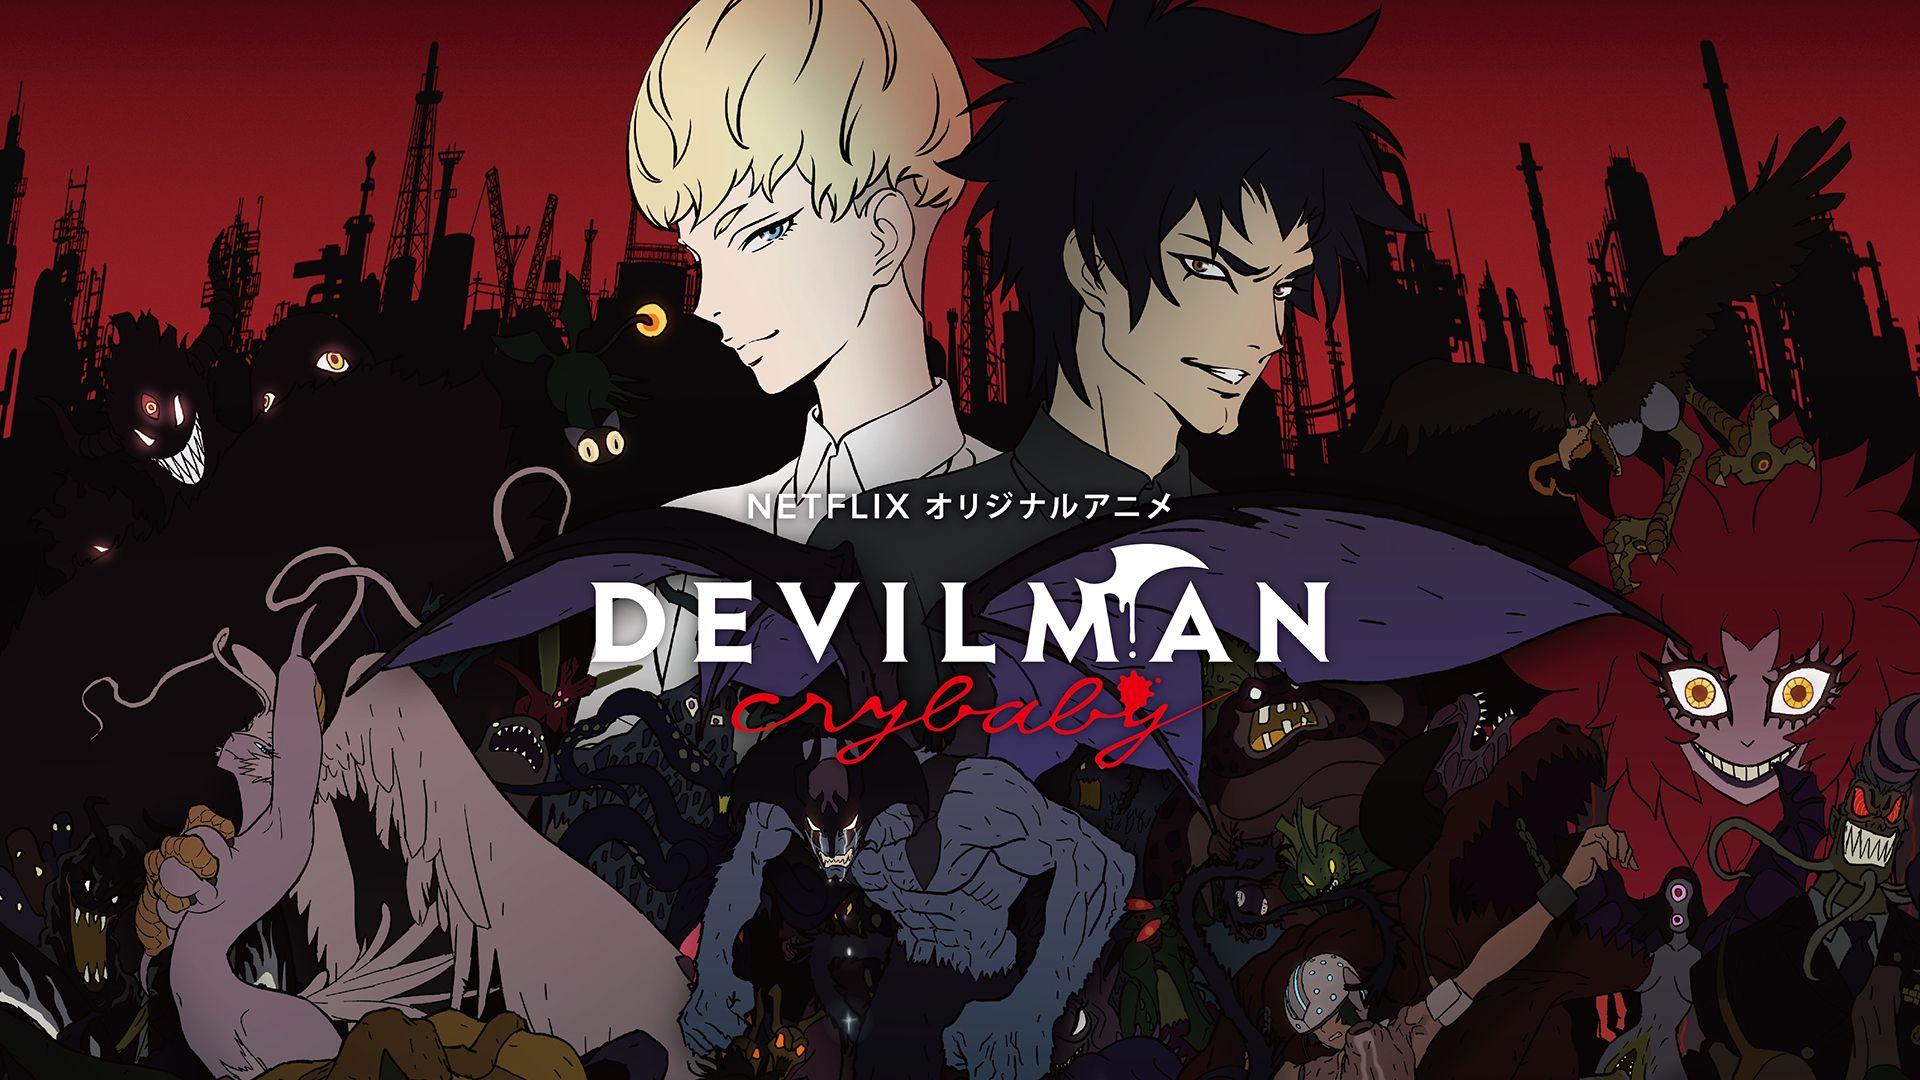 Review: Past meets present in the incredible Devilman crybaby